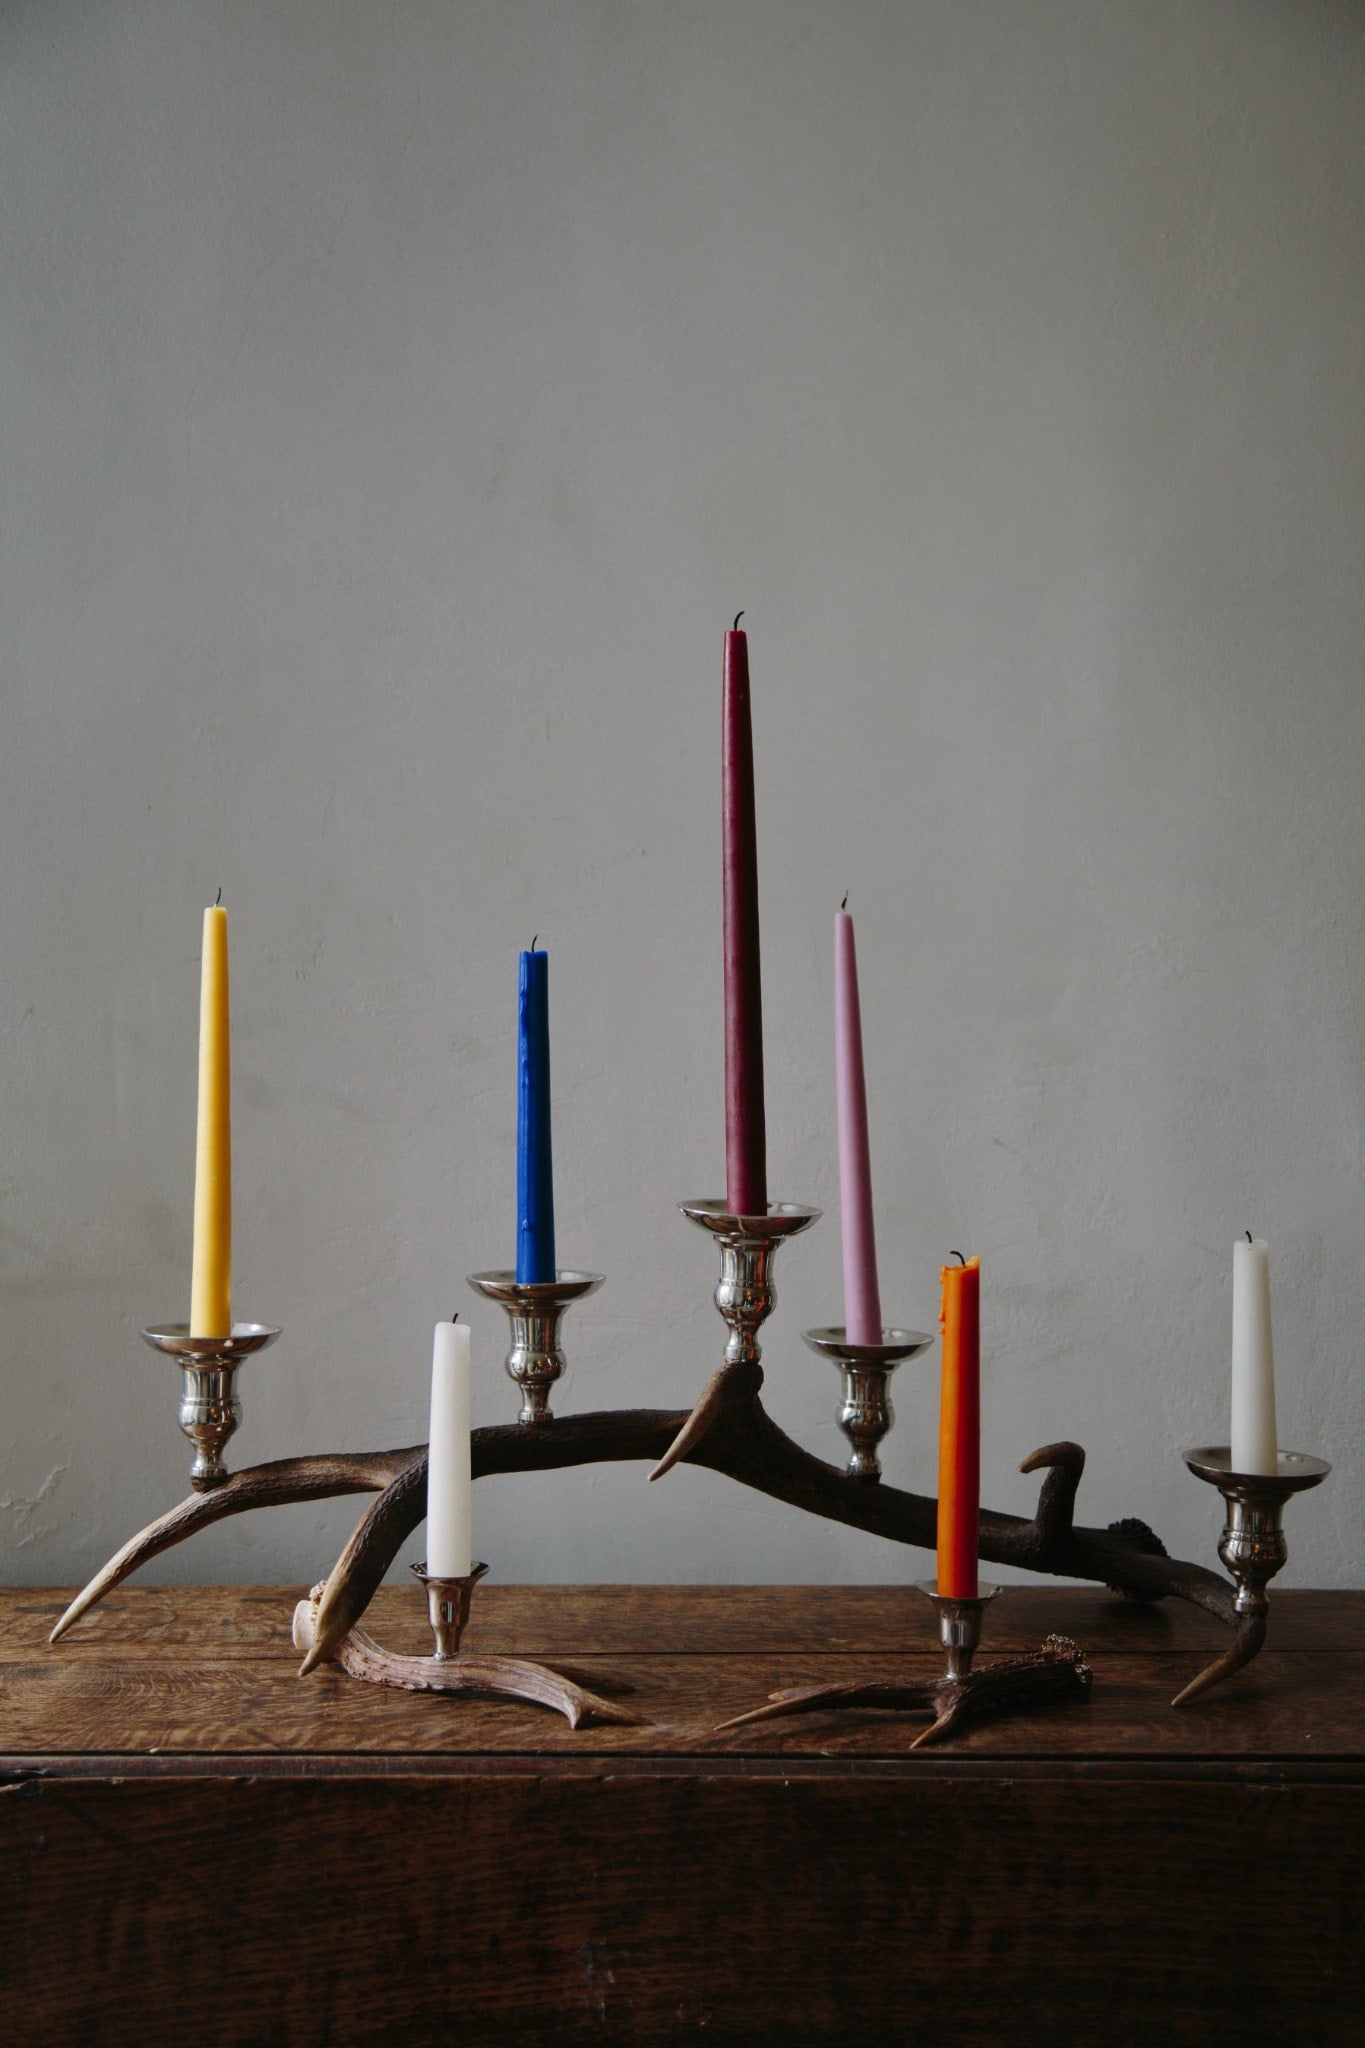 ALT=A display of candlesticks and candelabras on a wooden table top. Styled with colourful candles.